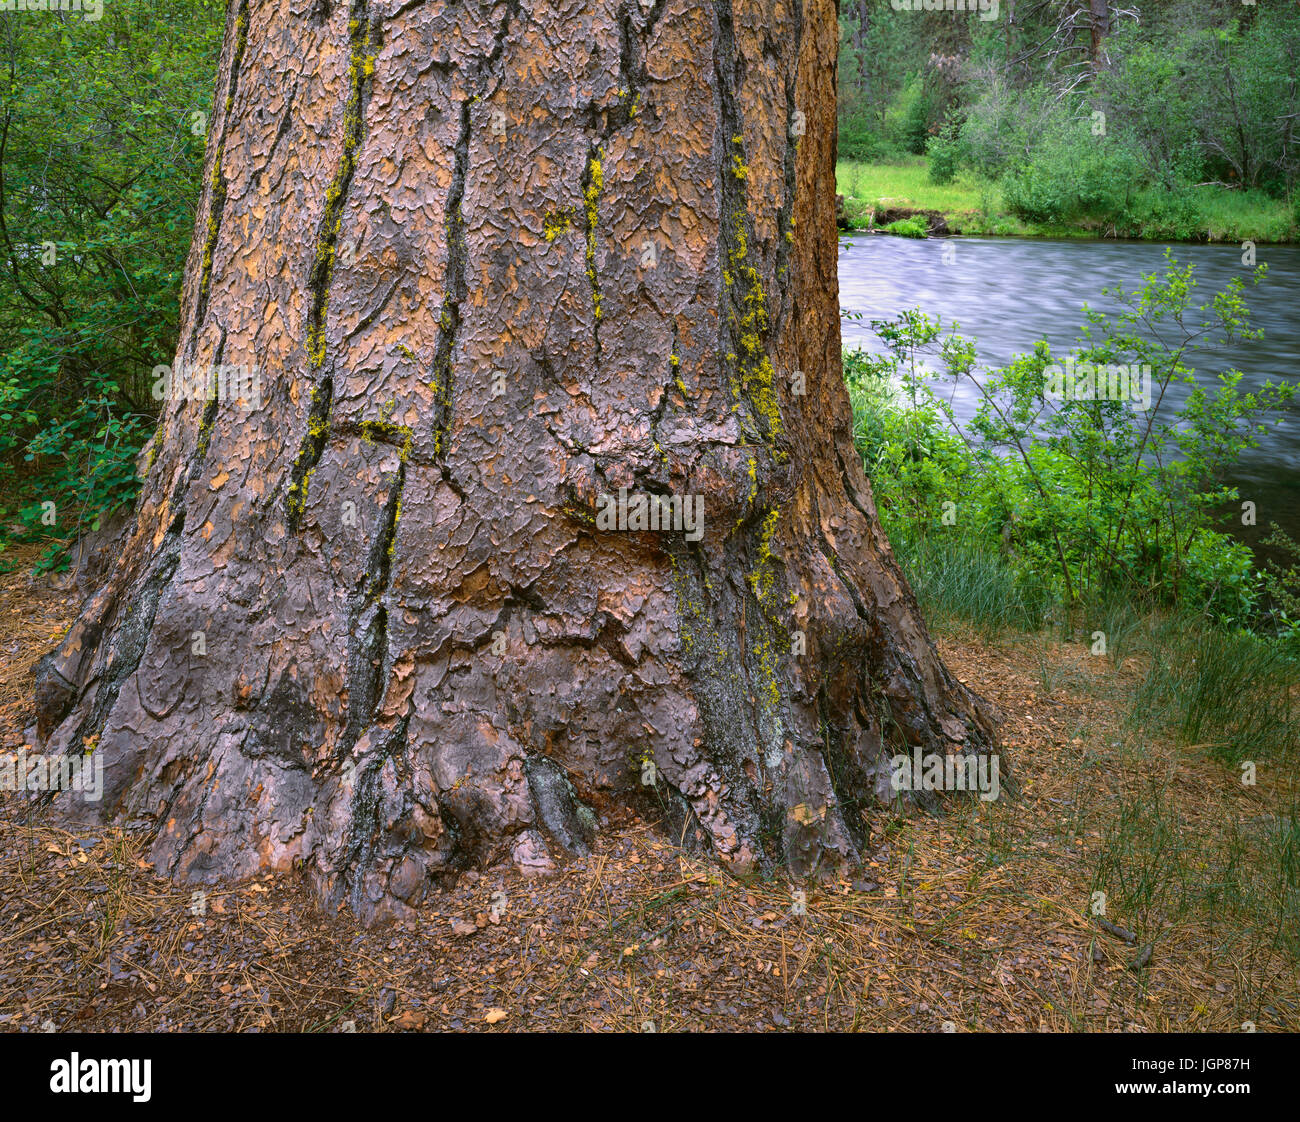 USA, Oregon, Deschutes National Forest, Large ponderosa pine grows next to the Metolius River in spring. Stock Photo